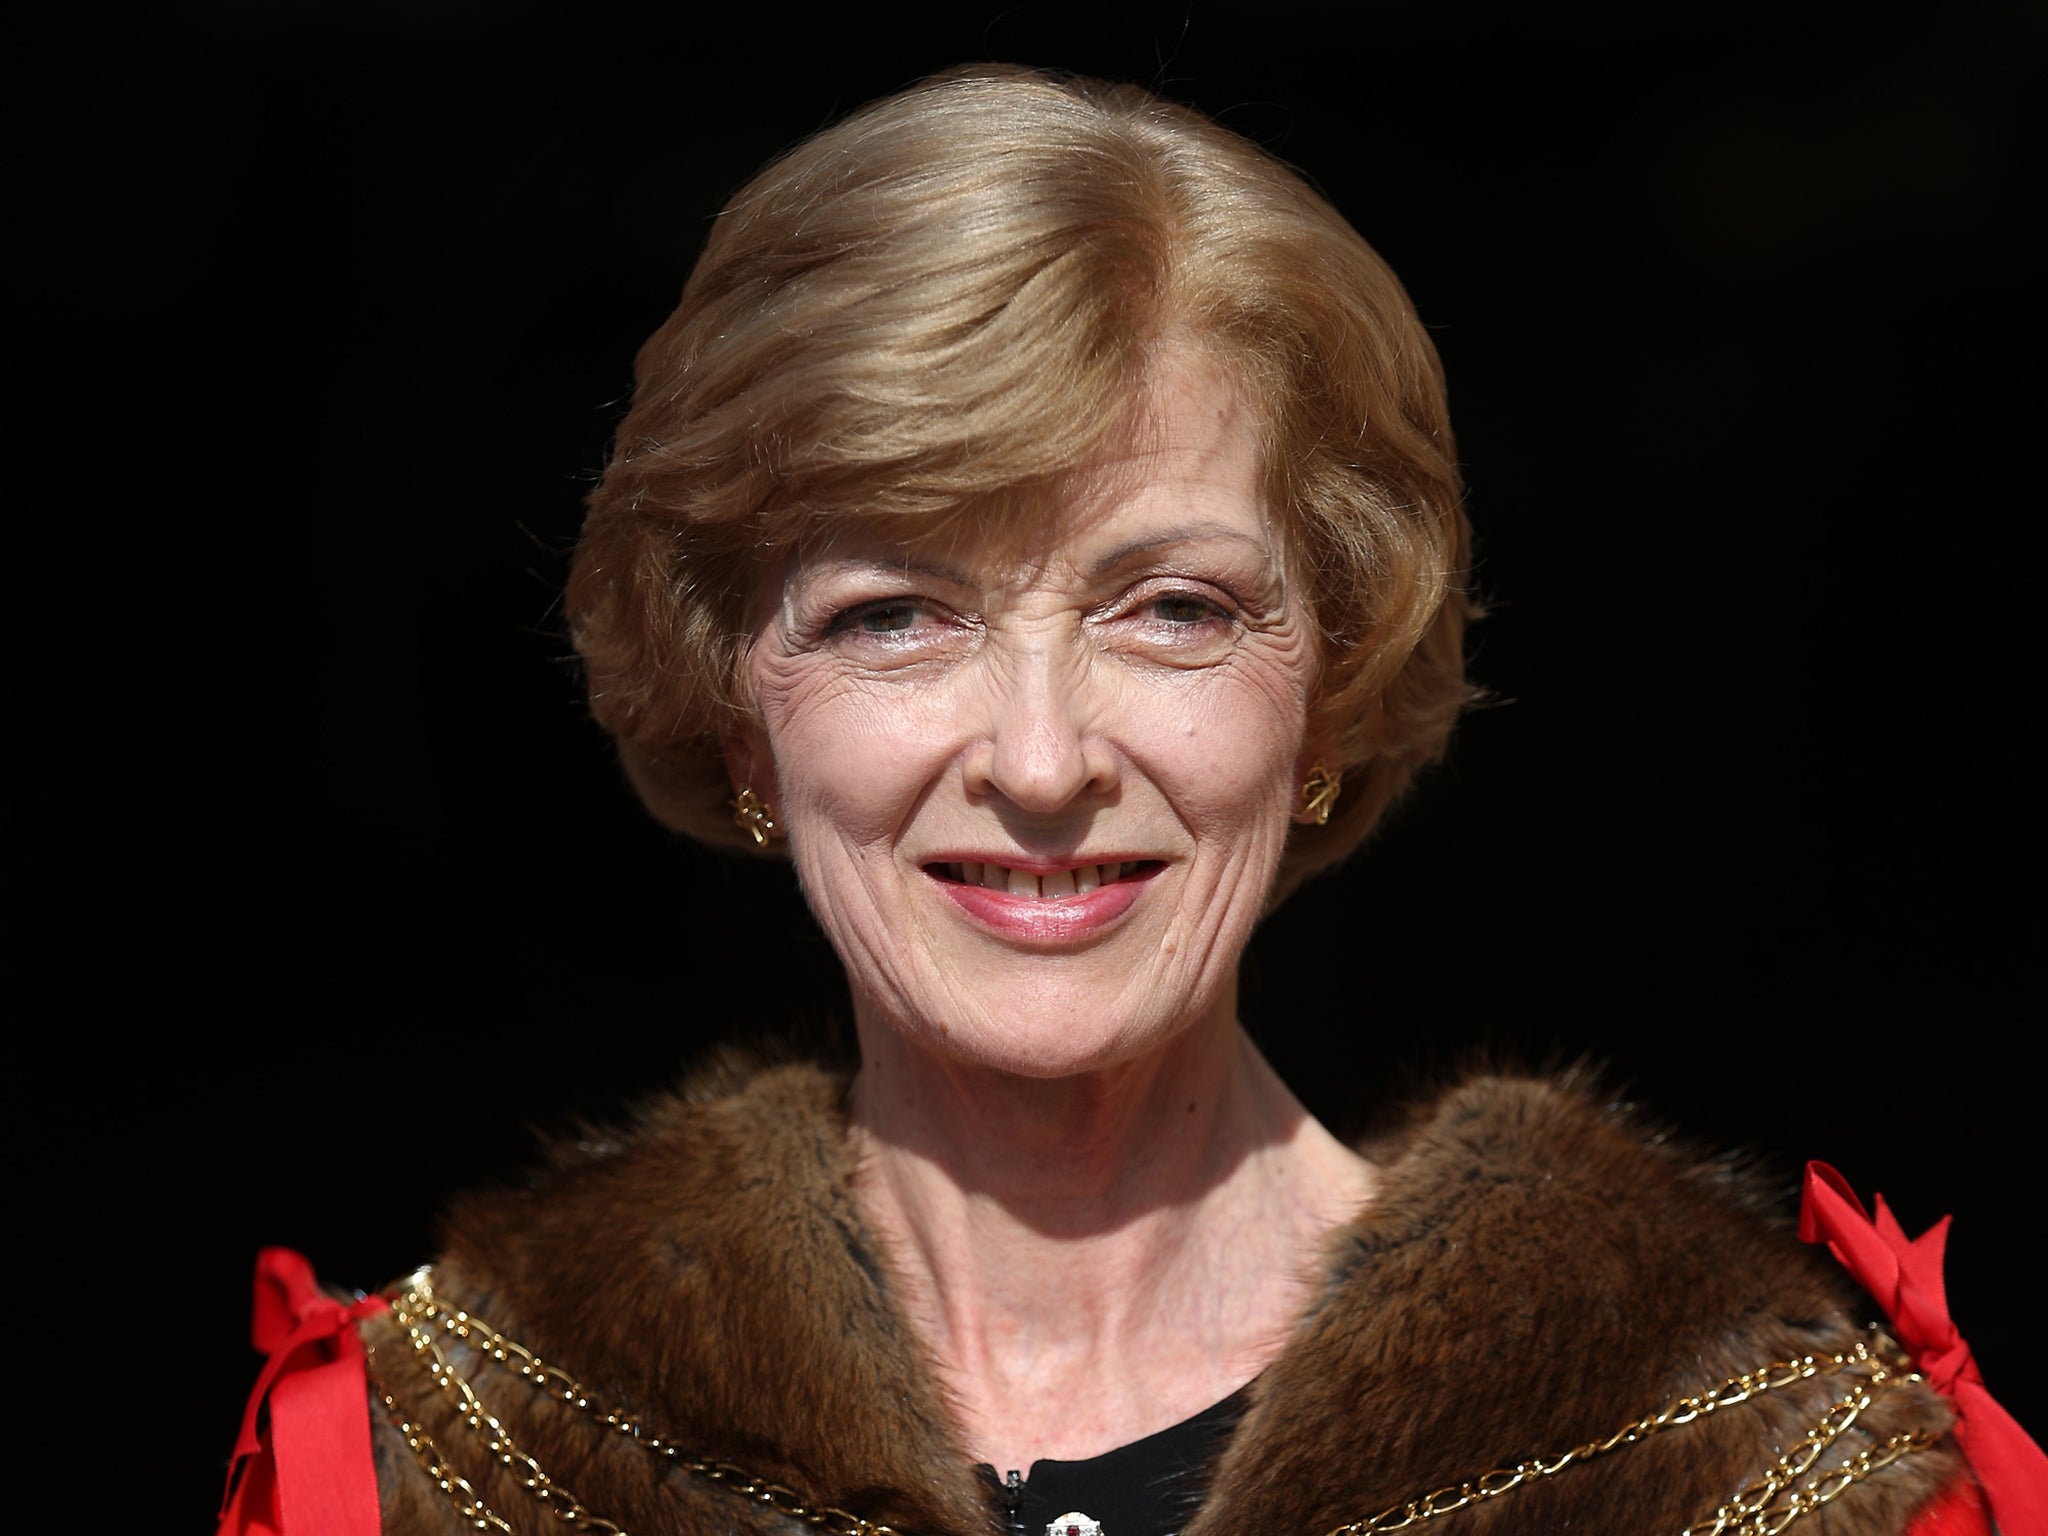 Critics of Fiona Woolf say she should step down amid accusations of an establishment cover-up